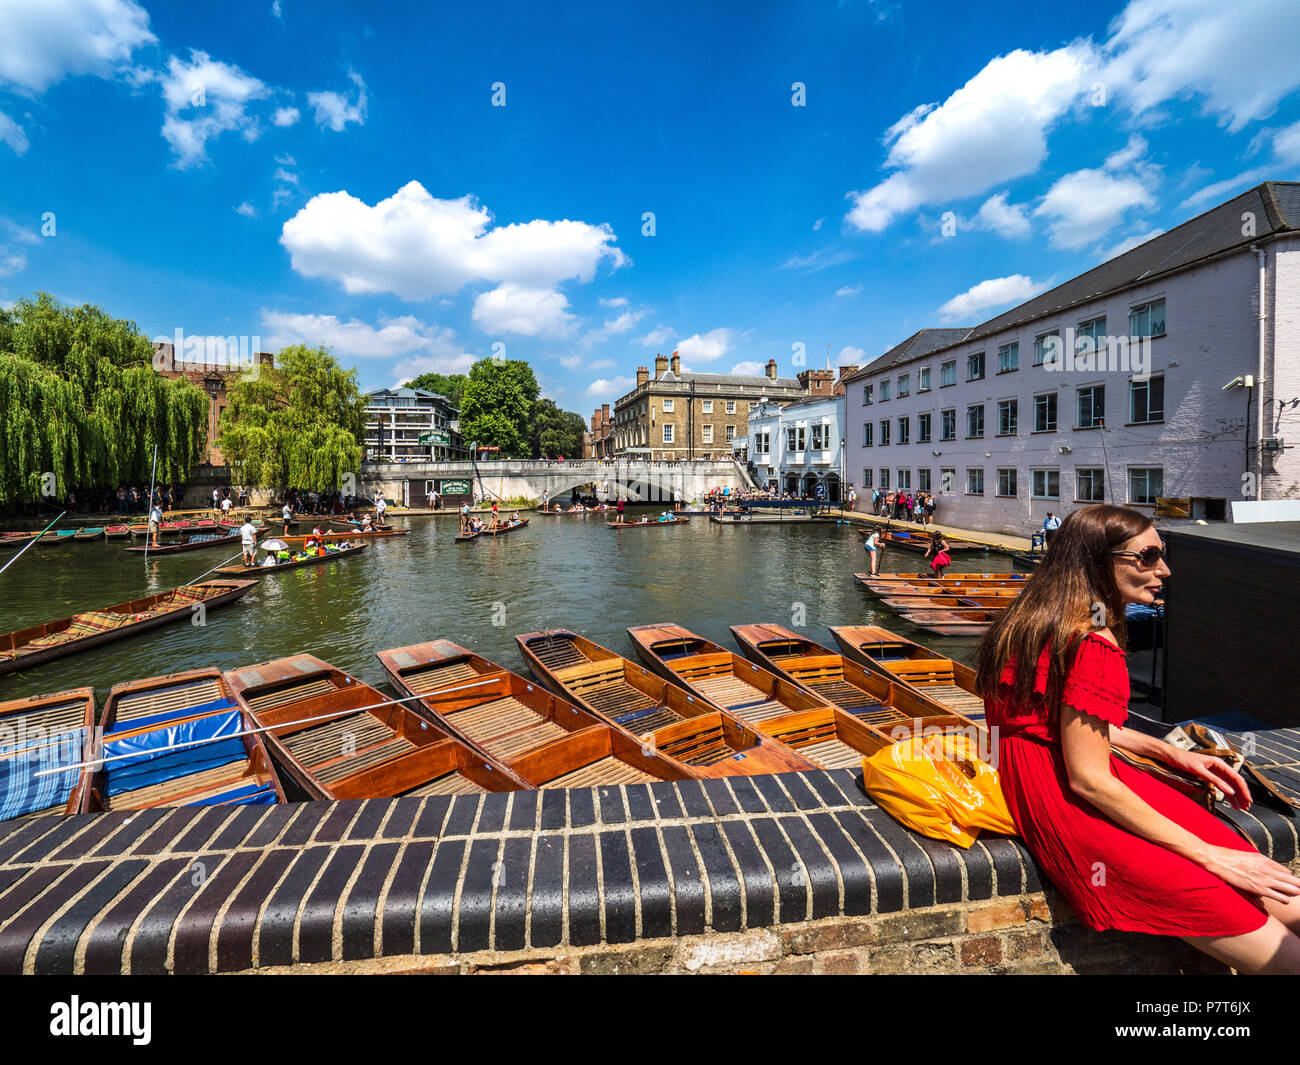 Cambridge Tourism - Punts waiting for hire on a warm summer day. Summer in Cambridge. Stock Photo